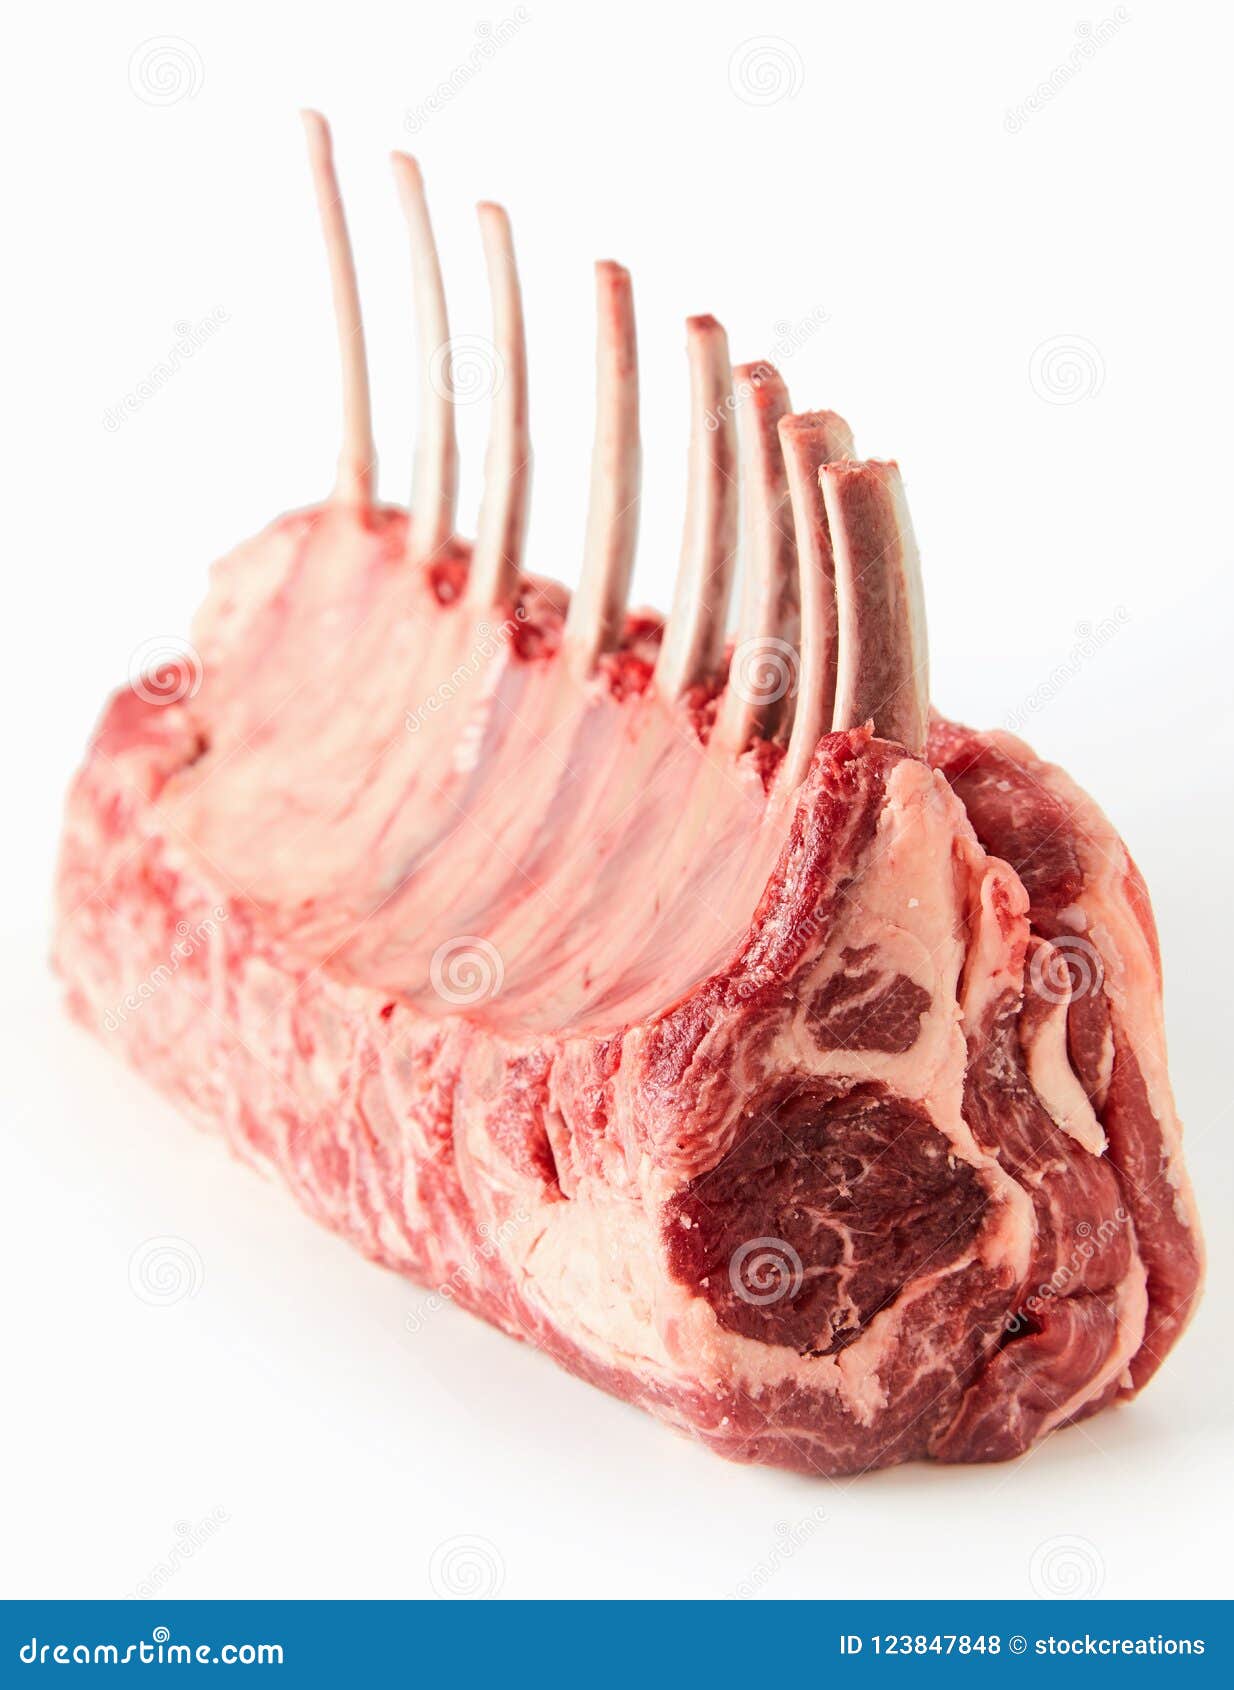 https://thumbs.dreamstime.com/z/close-up-view-fresh-raw-lamb-meat-bones-against-white-background-raw-lamb-chop-close-up-white-background-123847848.jpg